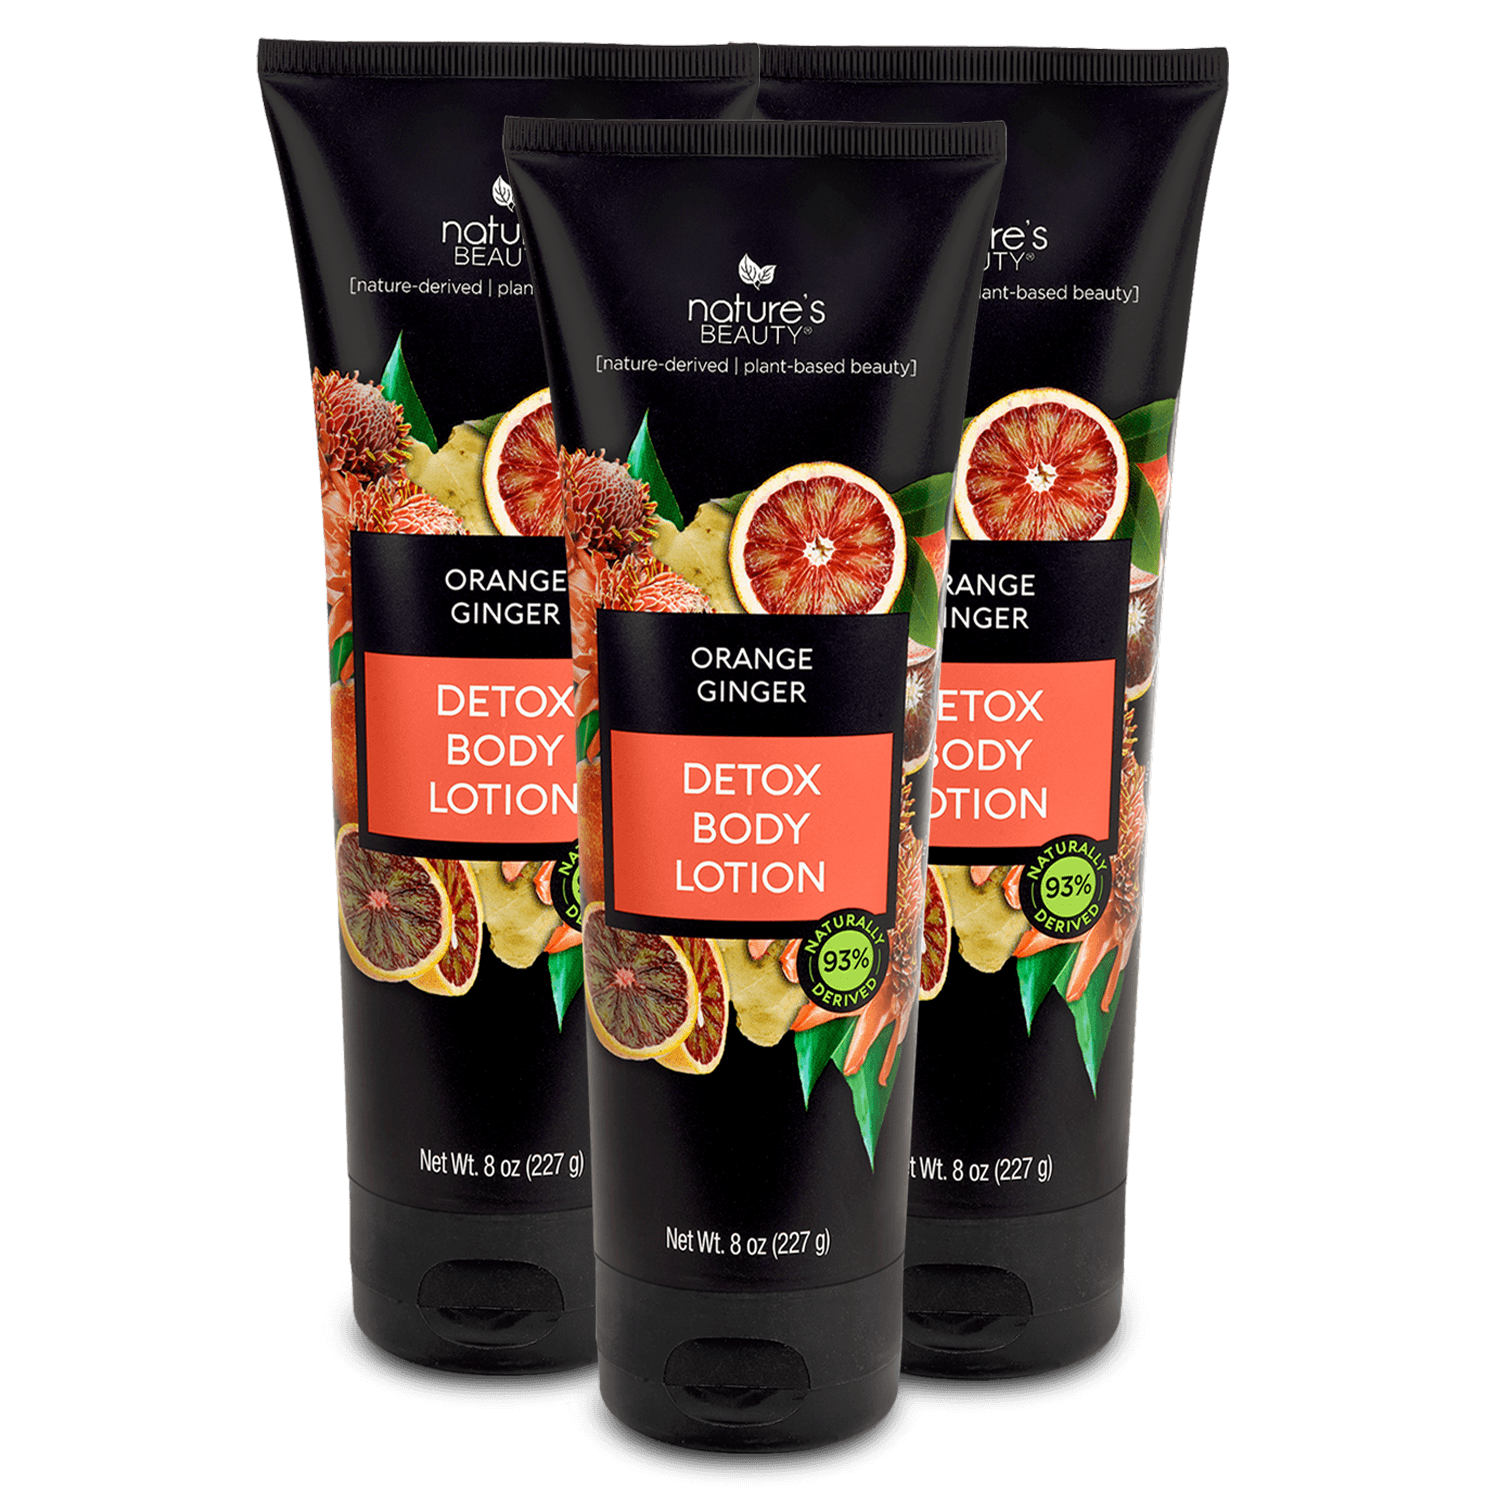 Orange Ginger Detox Body Lotion Nature's Beauty Body Care Buy 2 Get 1 Free 